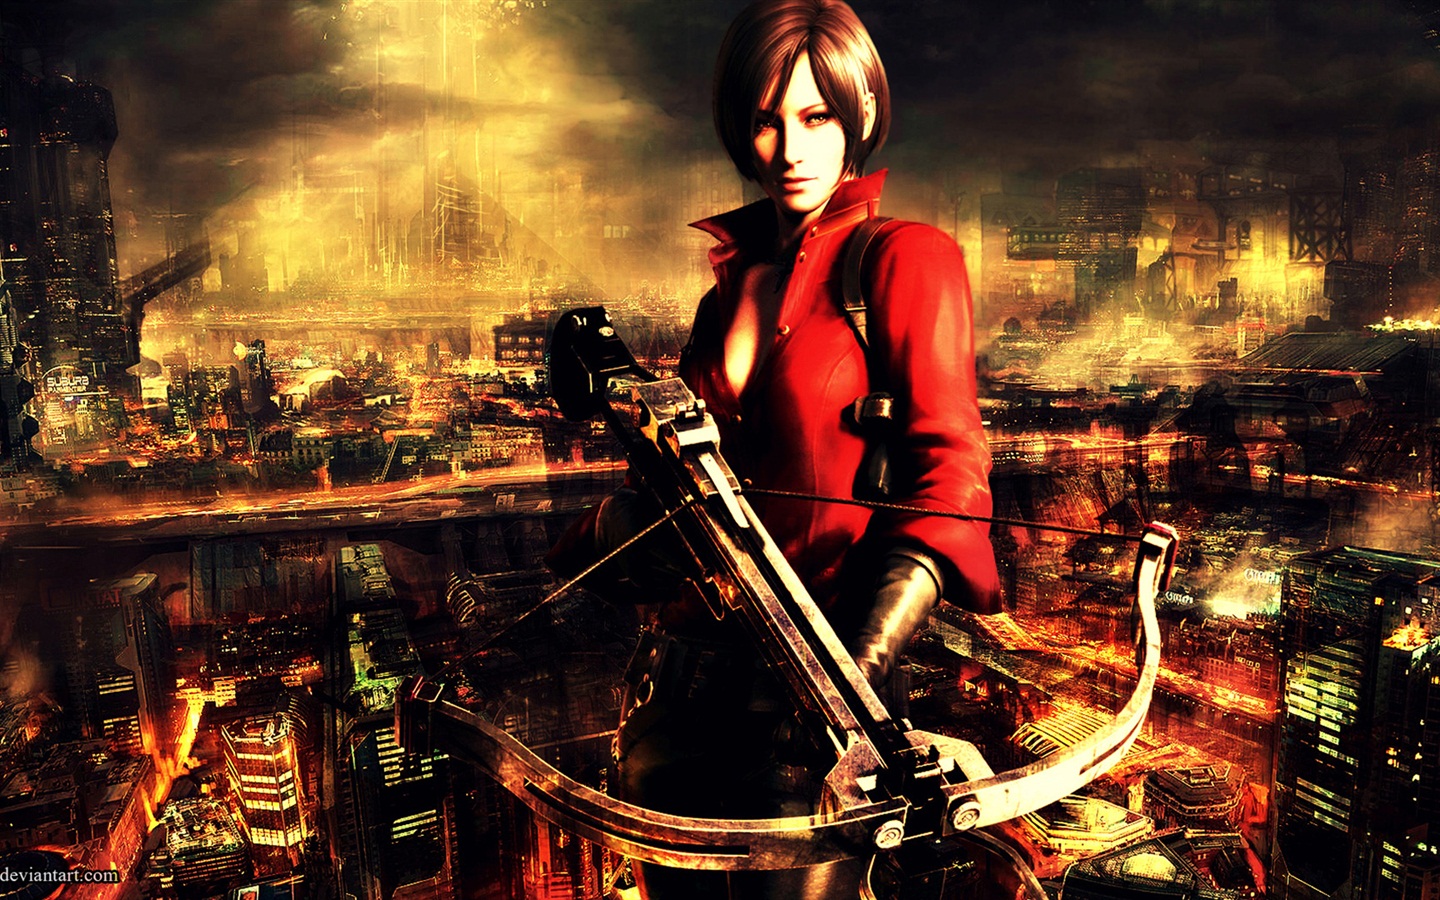 Resident Evil 6 HD game wallpapers #7 - 1440x900